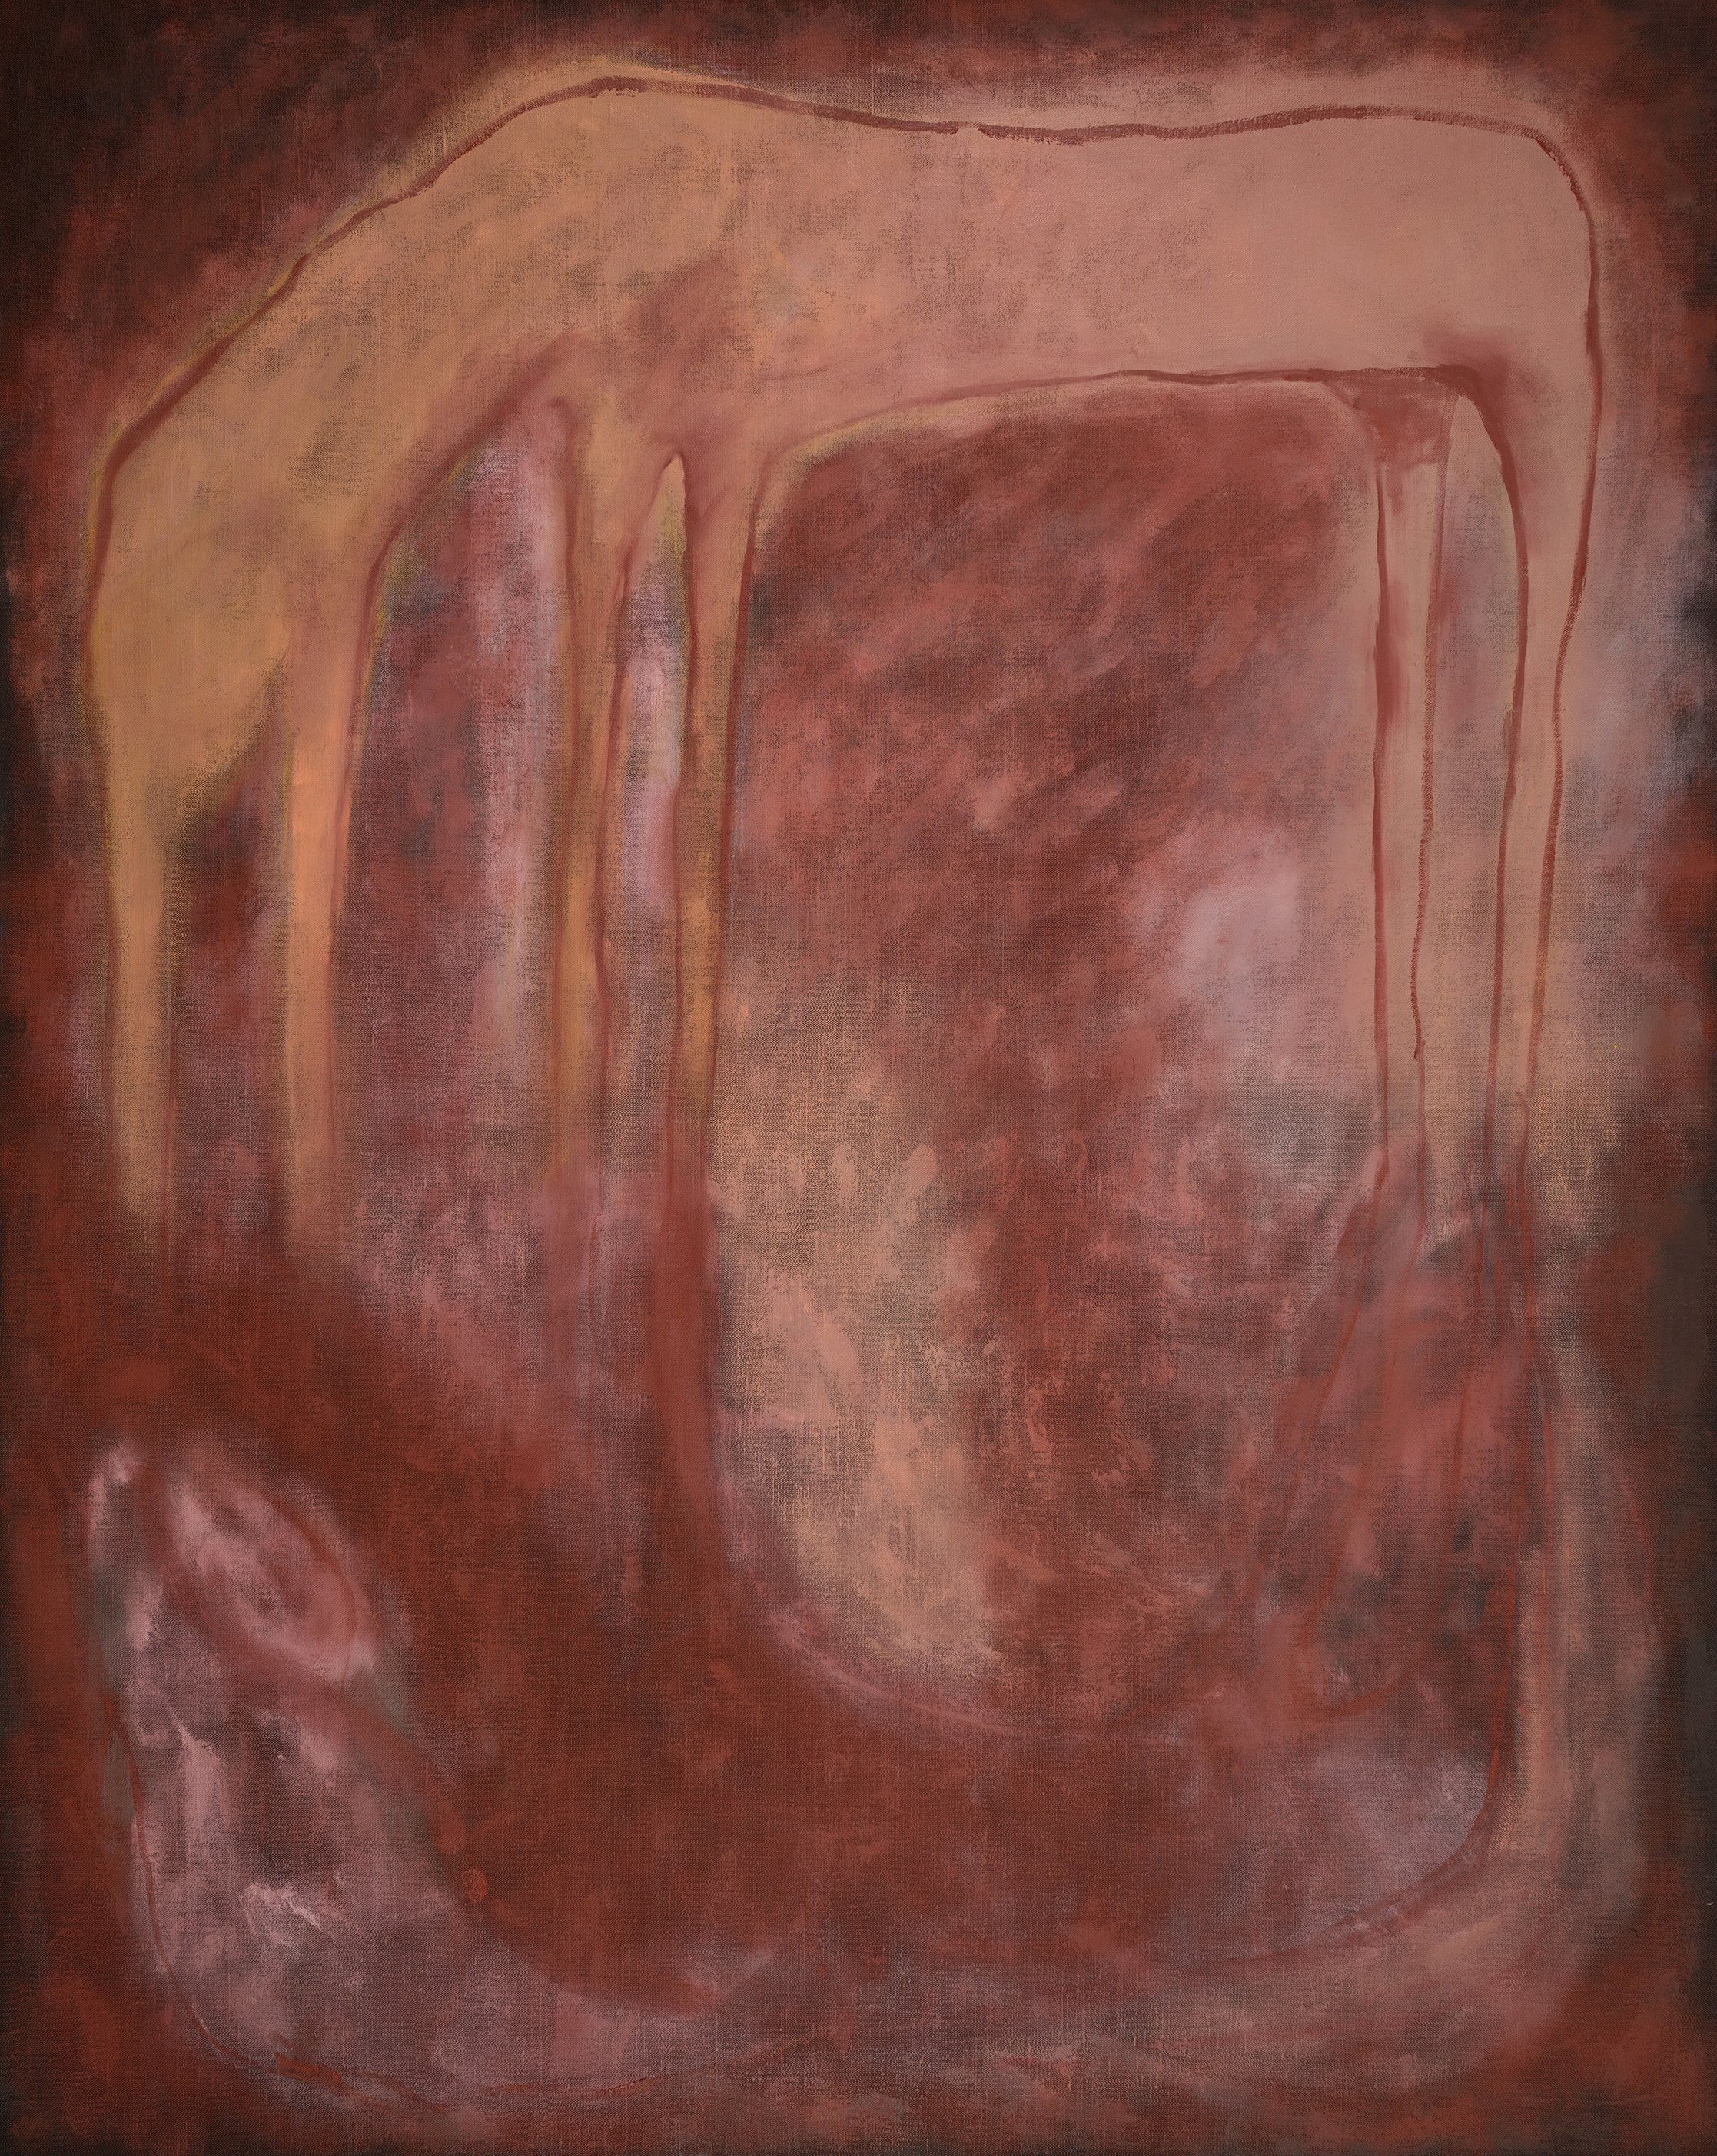 Red/Pink oxide, oil on linen, 200x150cm  photo Stephen Best